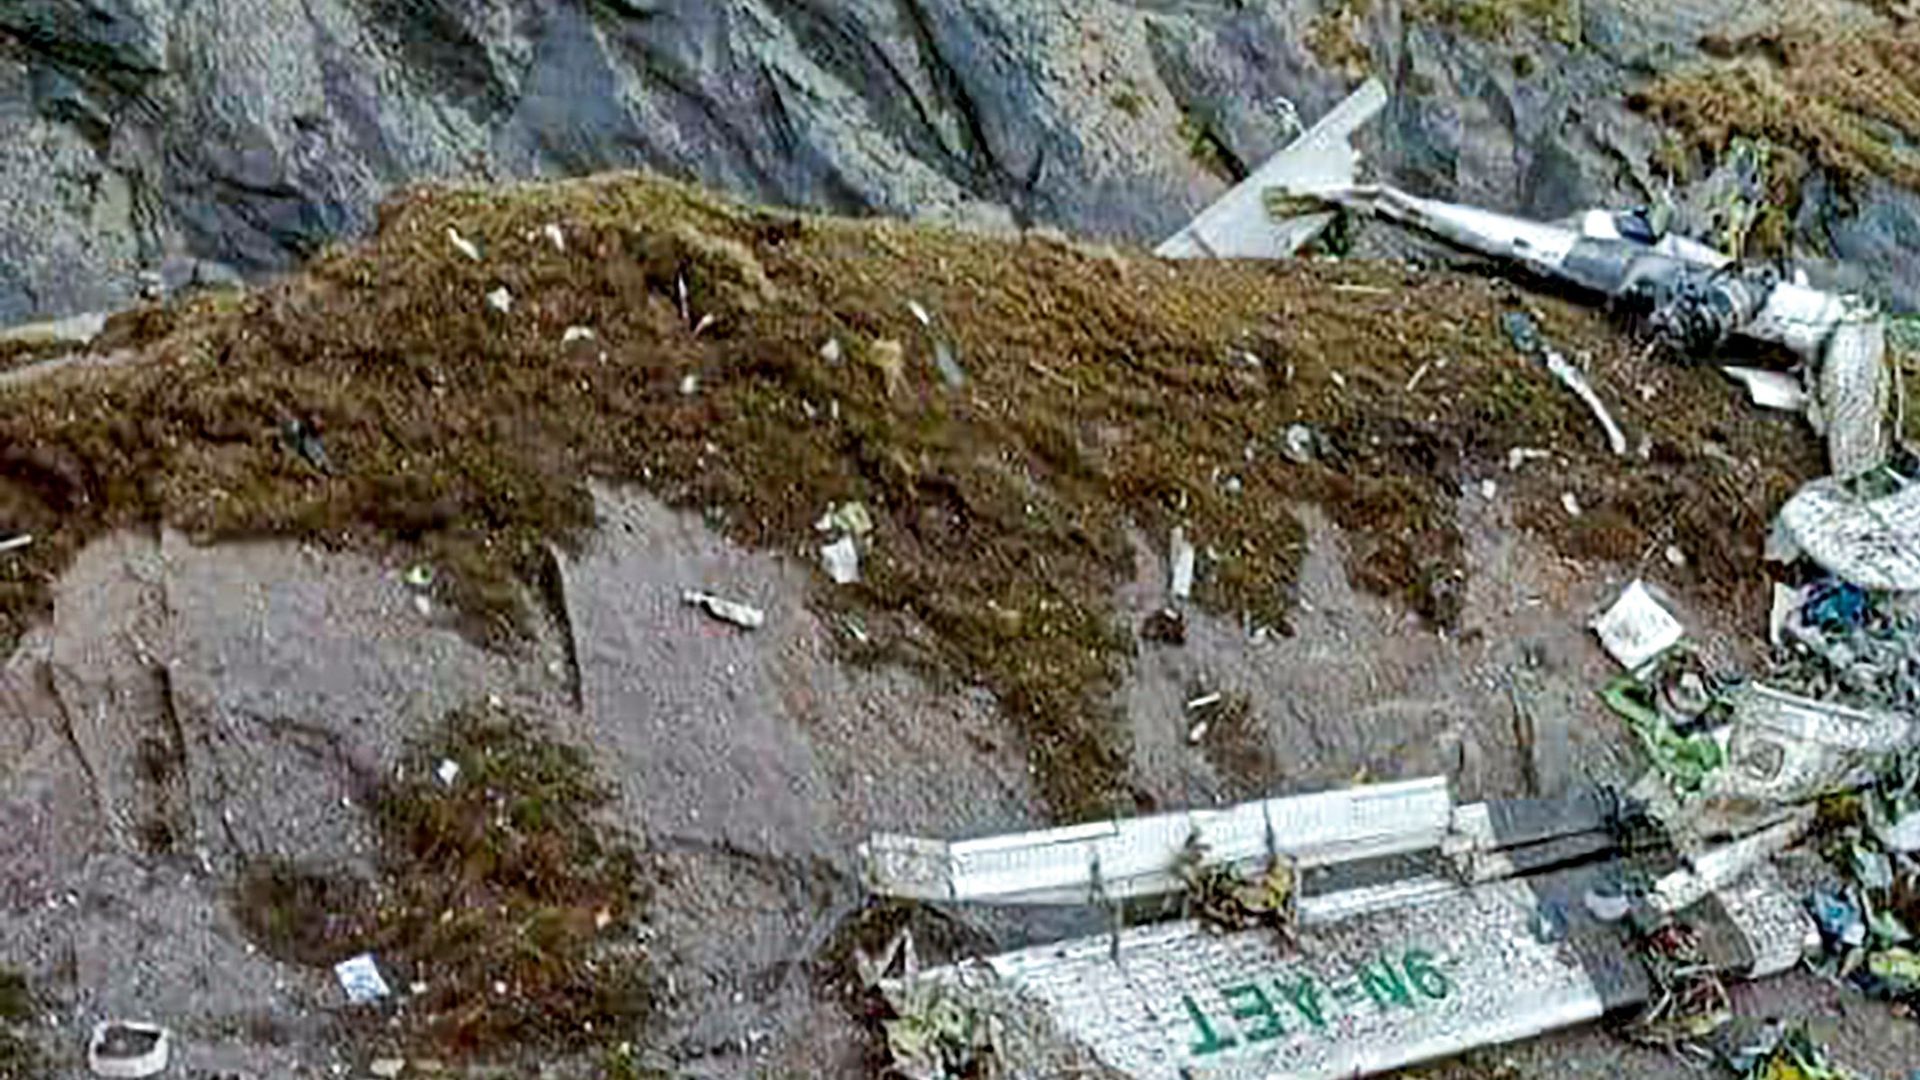  The wreckage of a Twin Otter aircraft, operated by Nepali carrier Tara Air, lay on a mountainside in Mustang on May 30, 2022, a day after it crashed. 